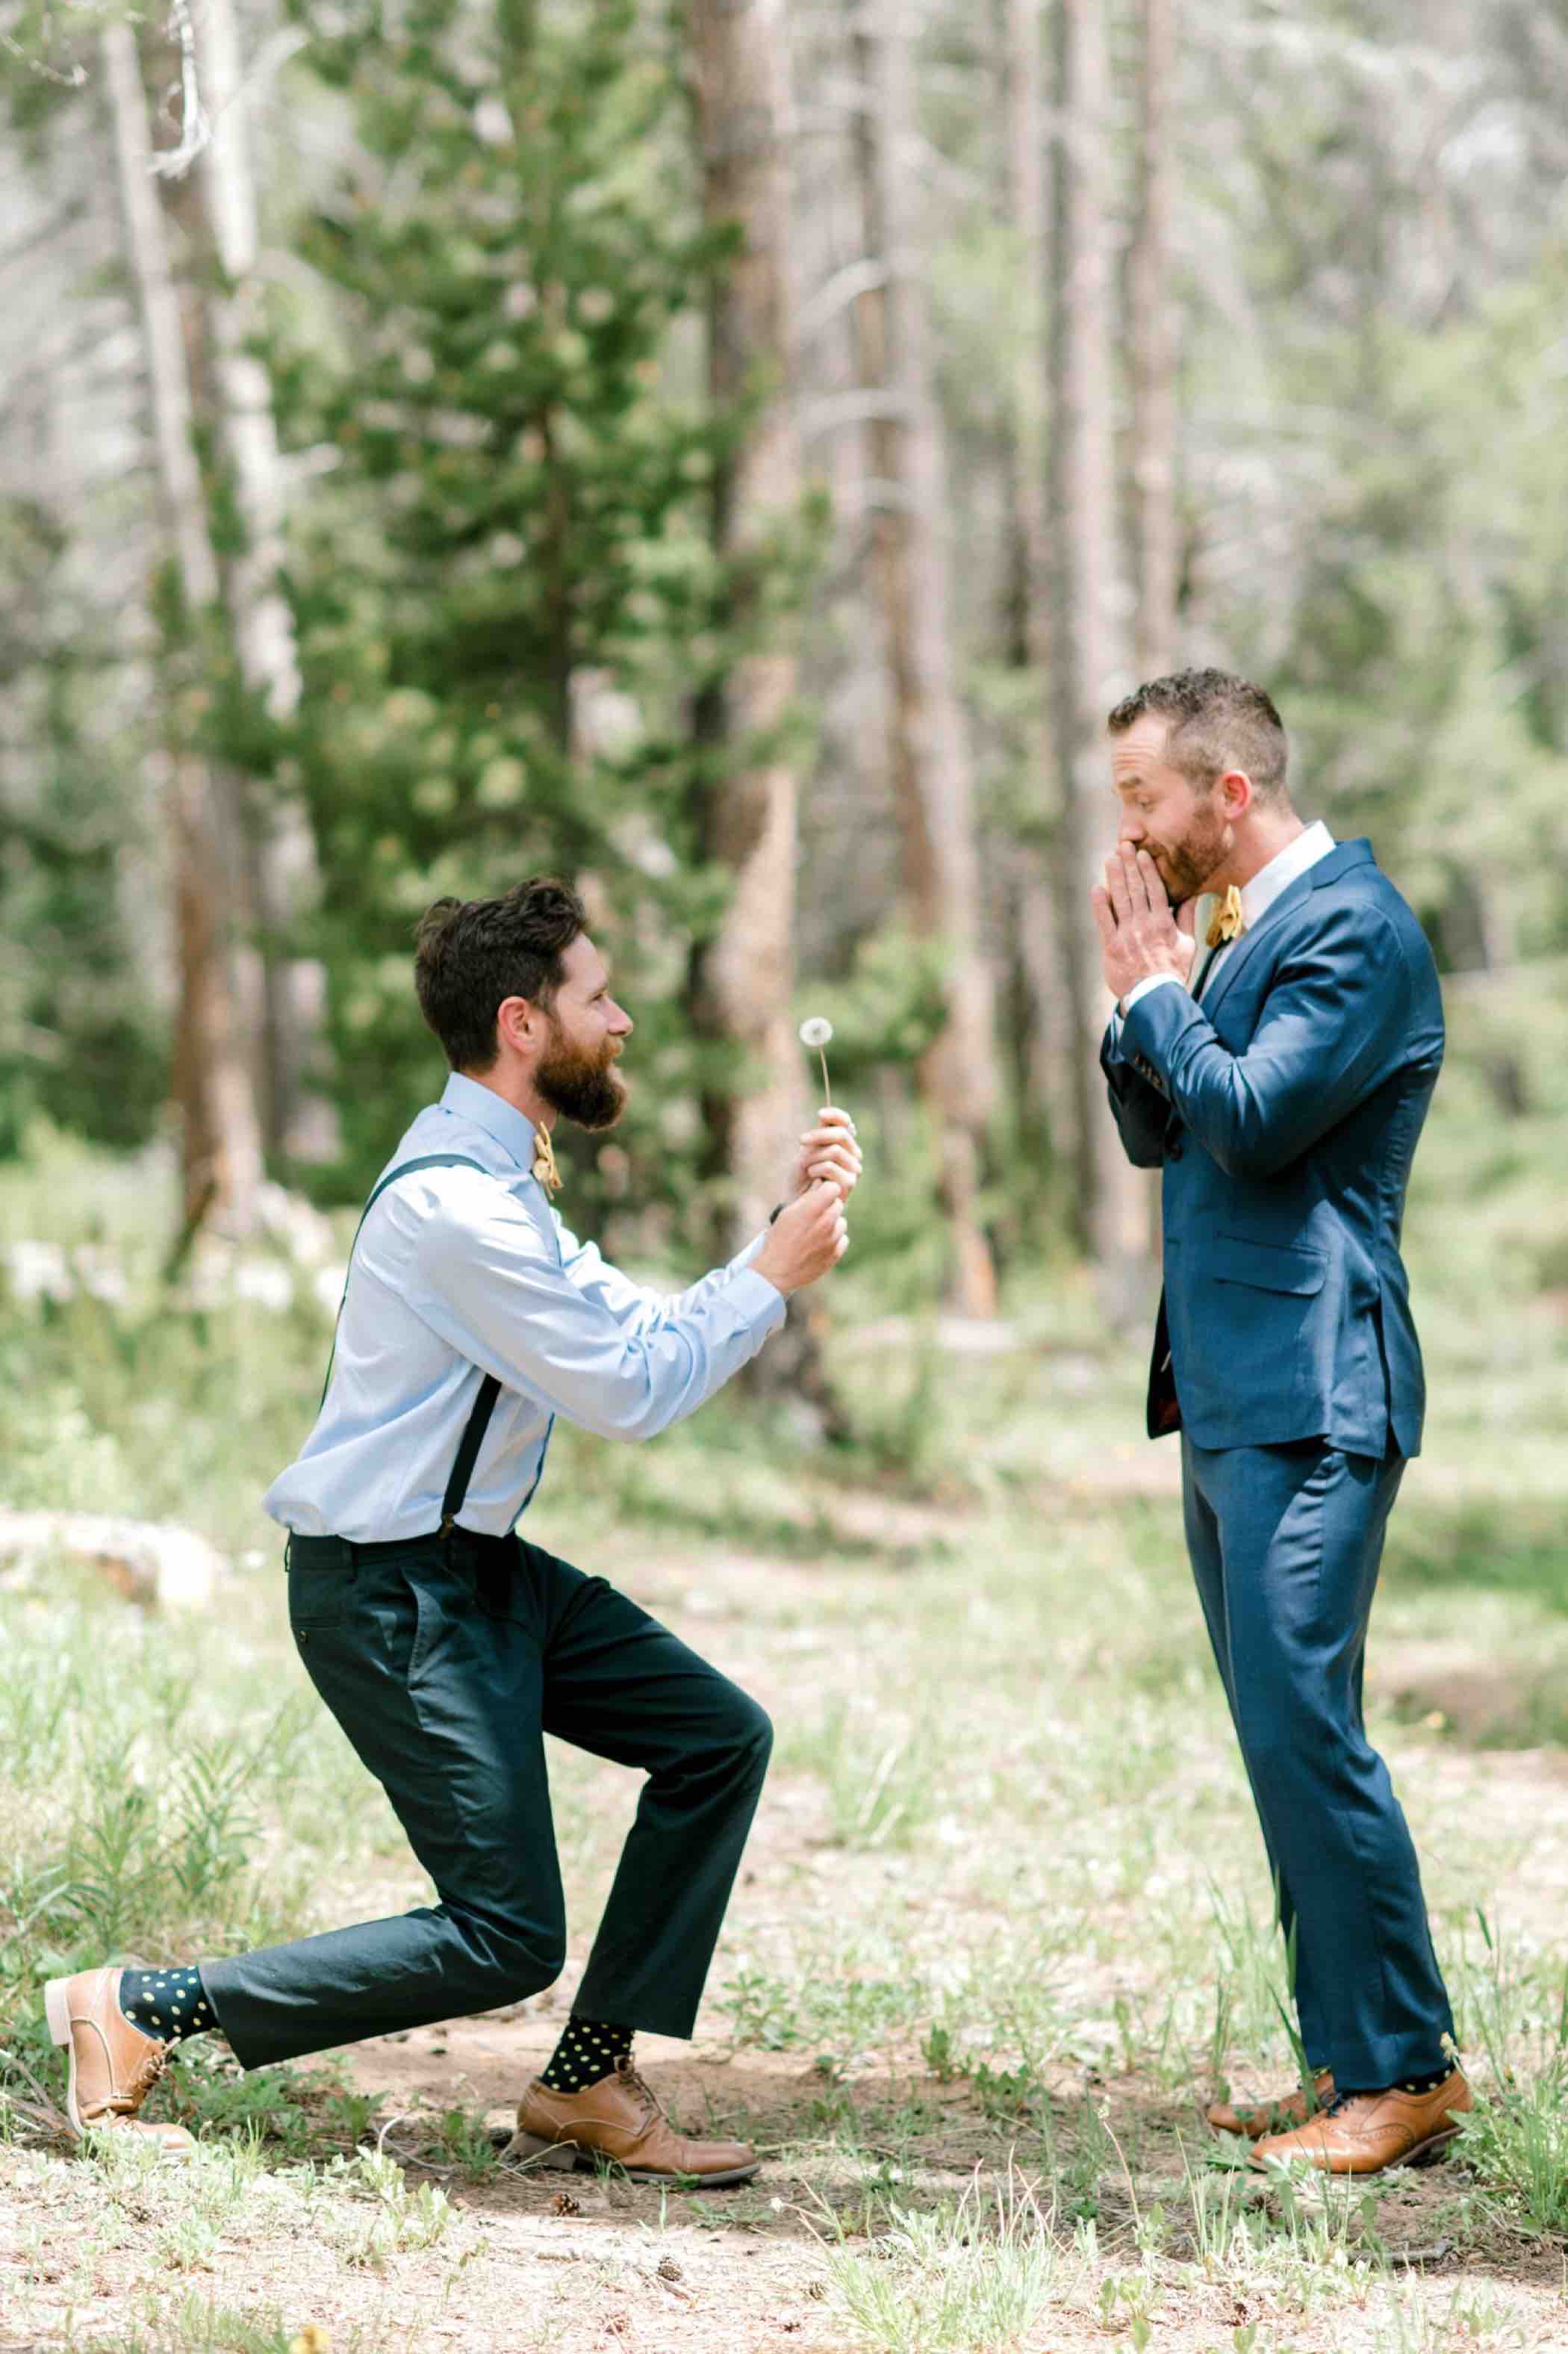 Faux fake proposal groomsmen photos outside Piney River Ranch in Vail in the Colorado Rocky Mountains. Photo by Ali and Garrett, Romantic, Adventurous, Nostalgic Wedding Photographers.